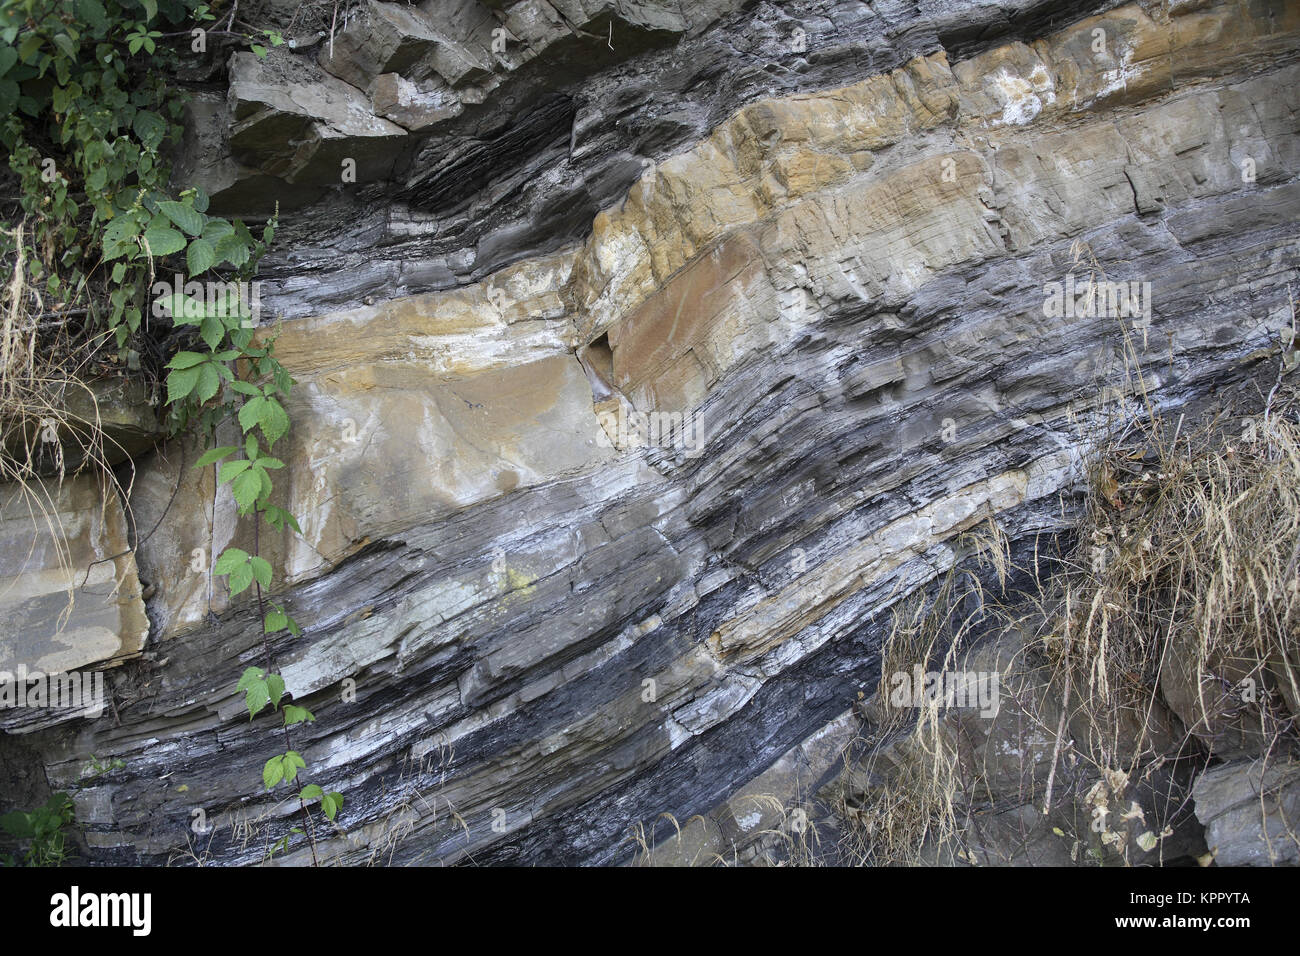 Germany, Ruhr area, Herdecke, geological outcrop at the Schiffswinkel, shale clay, sandstone and black coal, originated for 300 million years.  Deutsc Stock Photo